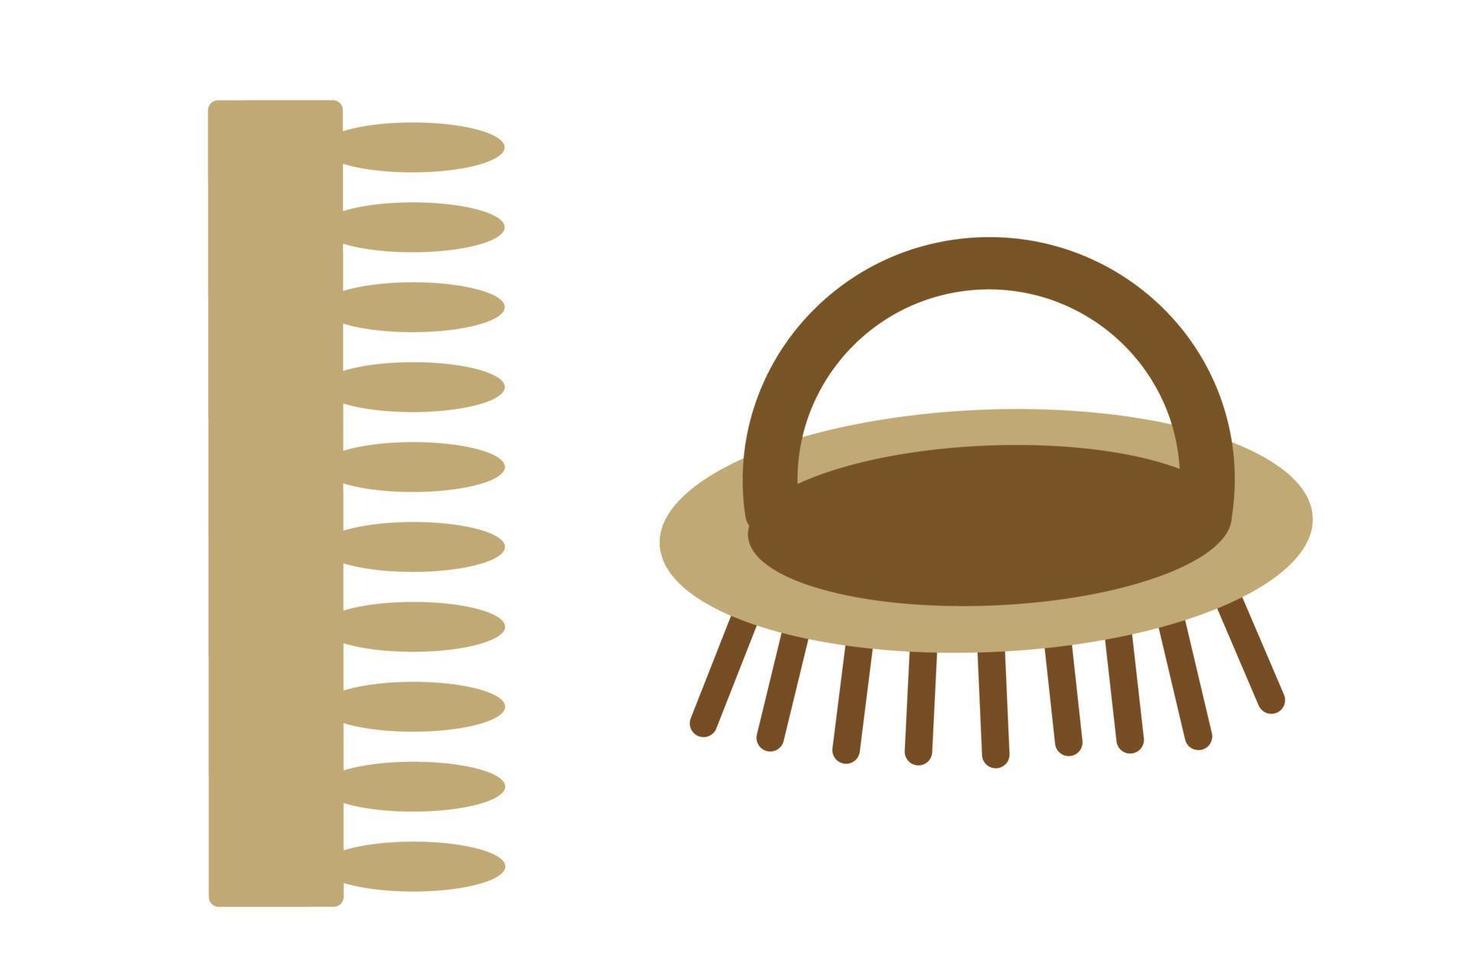 Comb and brush for combing dog or cat hair. Accessories for pets. Shop concept. vector